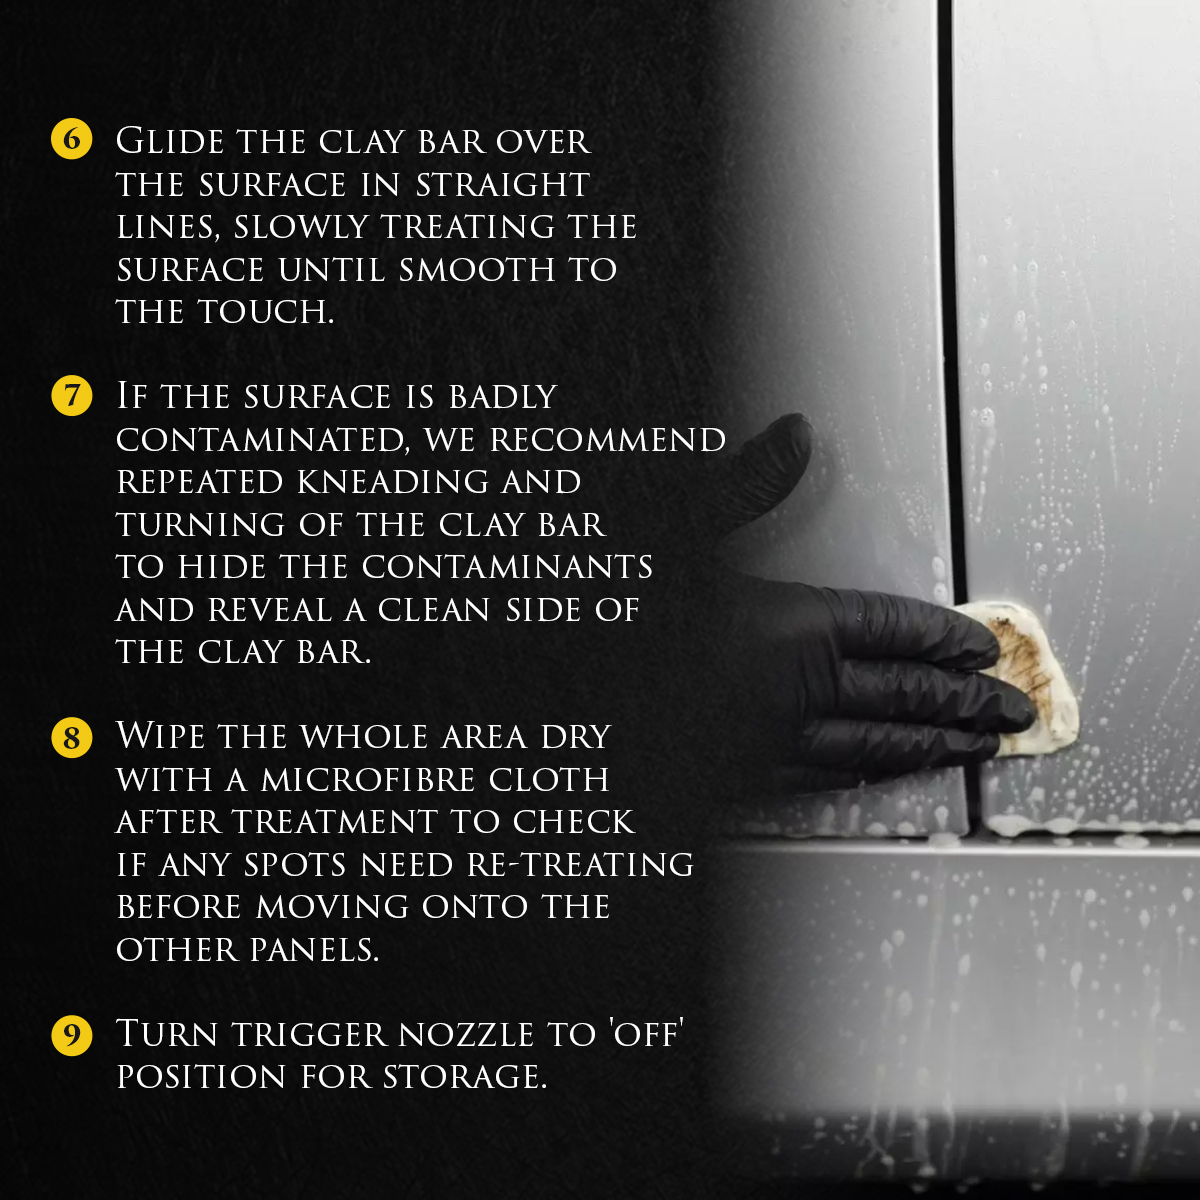 Image shows clay bar gliding over silver car, picking up microscopic embedded paintwork contaminants. Text: if the clay bar is dropped onto the floor or becomes fully contaminated it must be disposed of immediately.